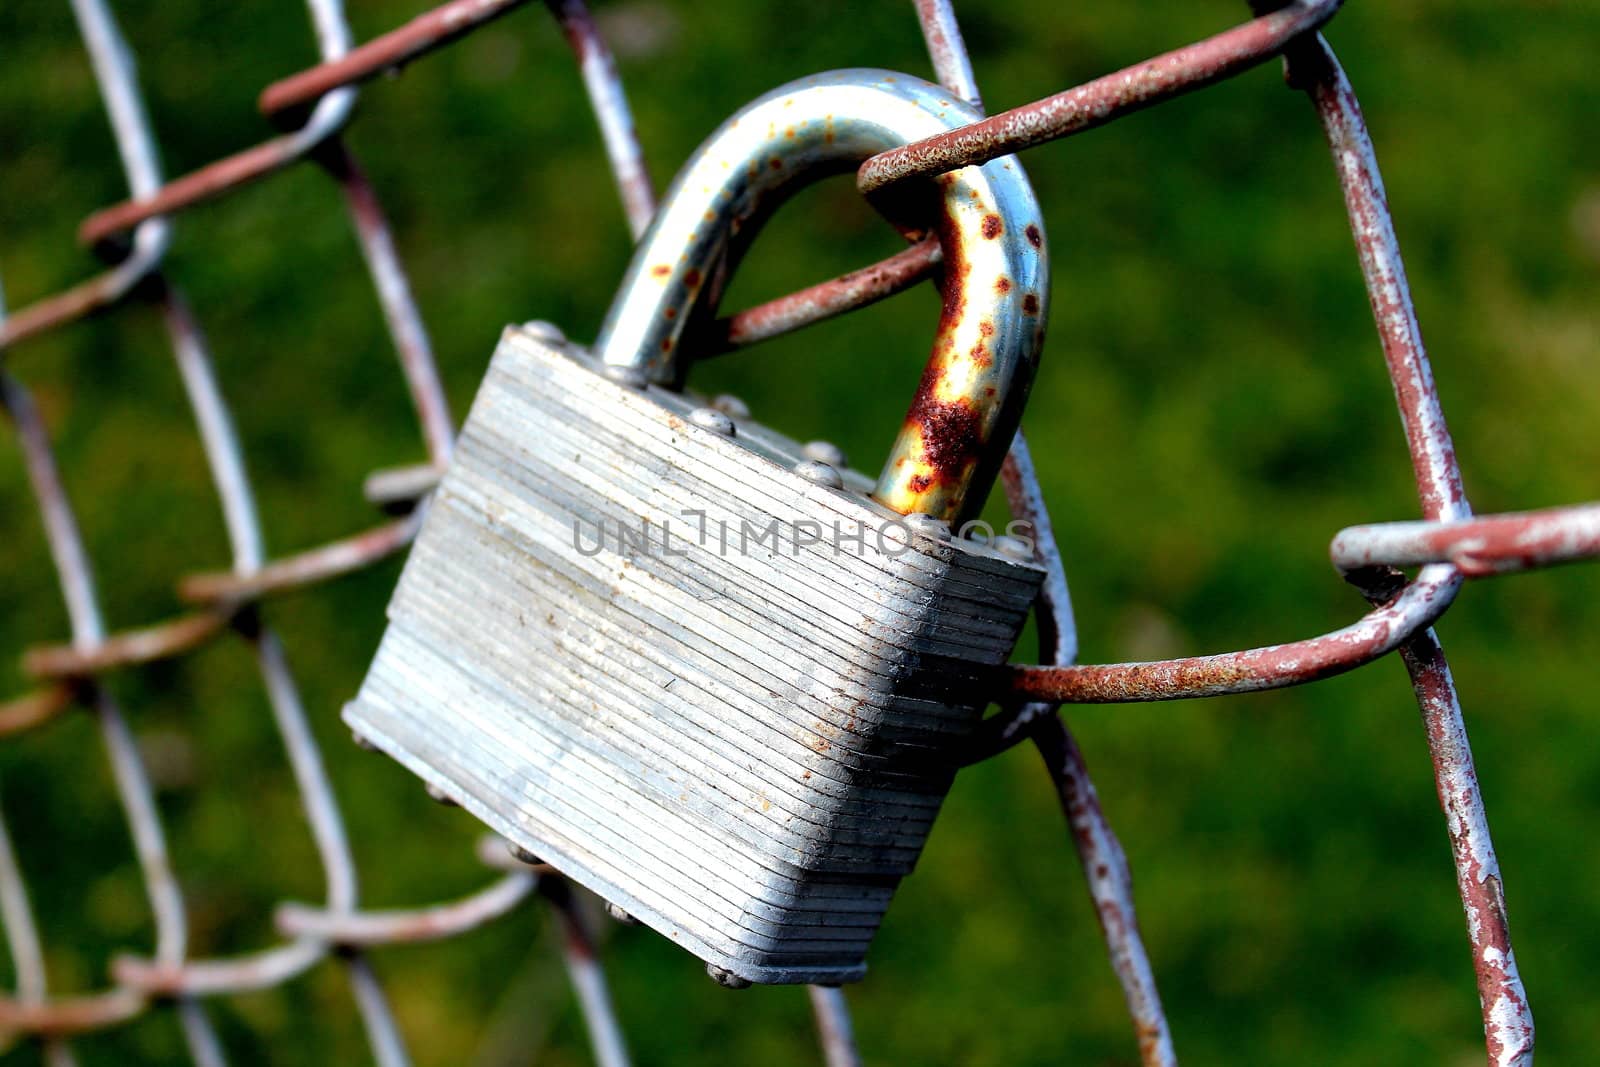 A lock attached to a chain link fence